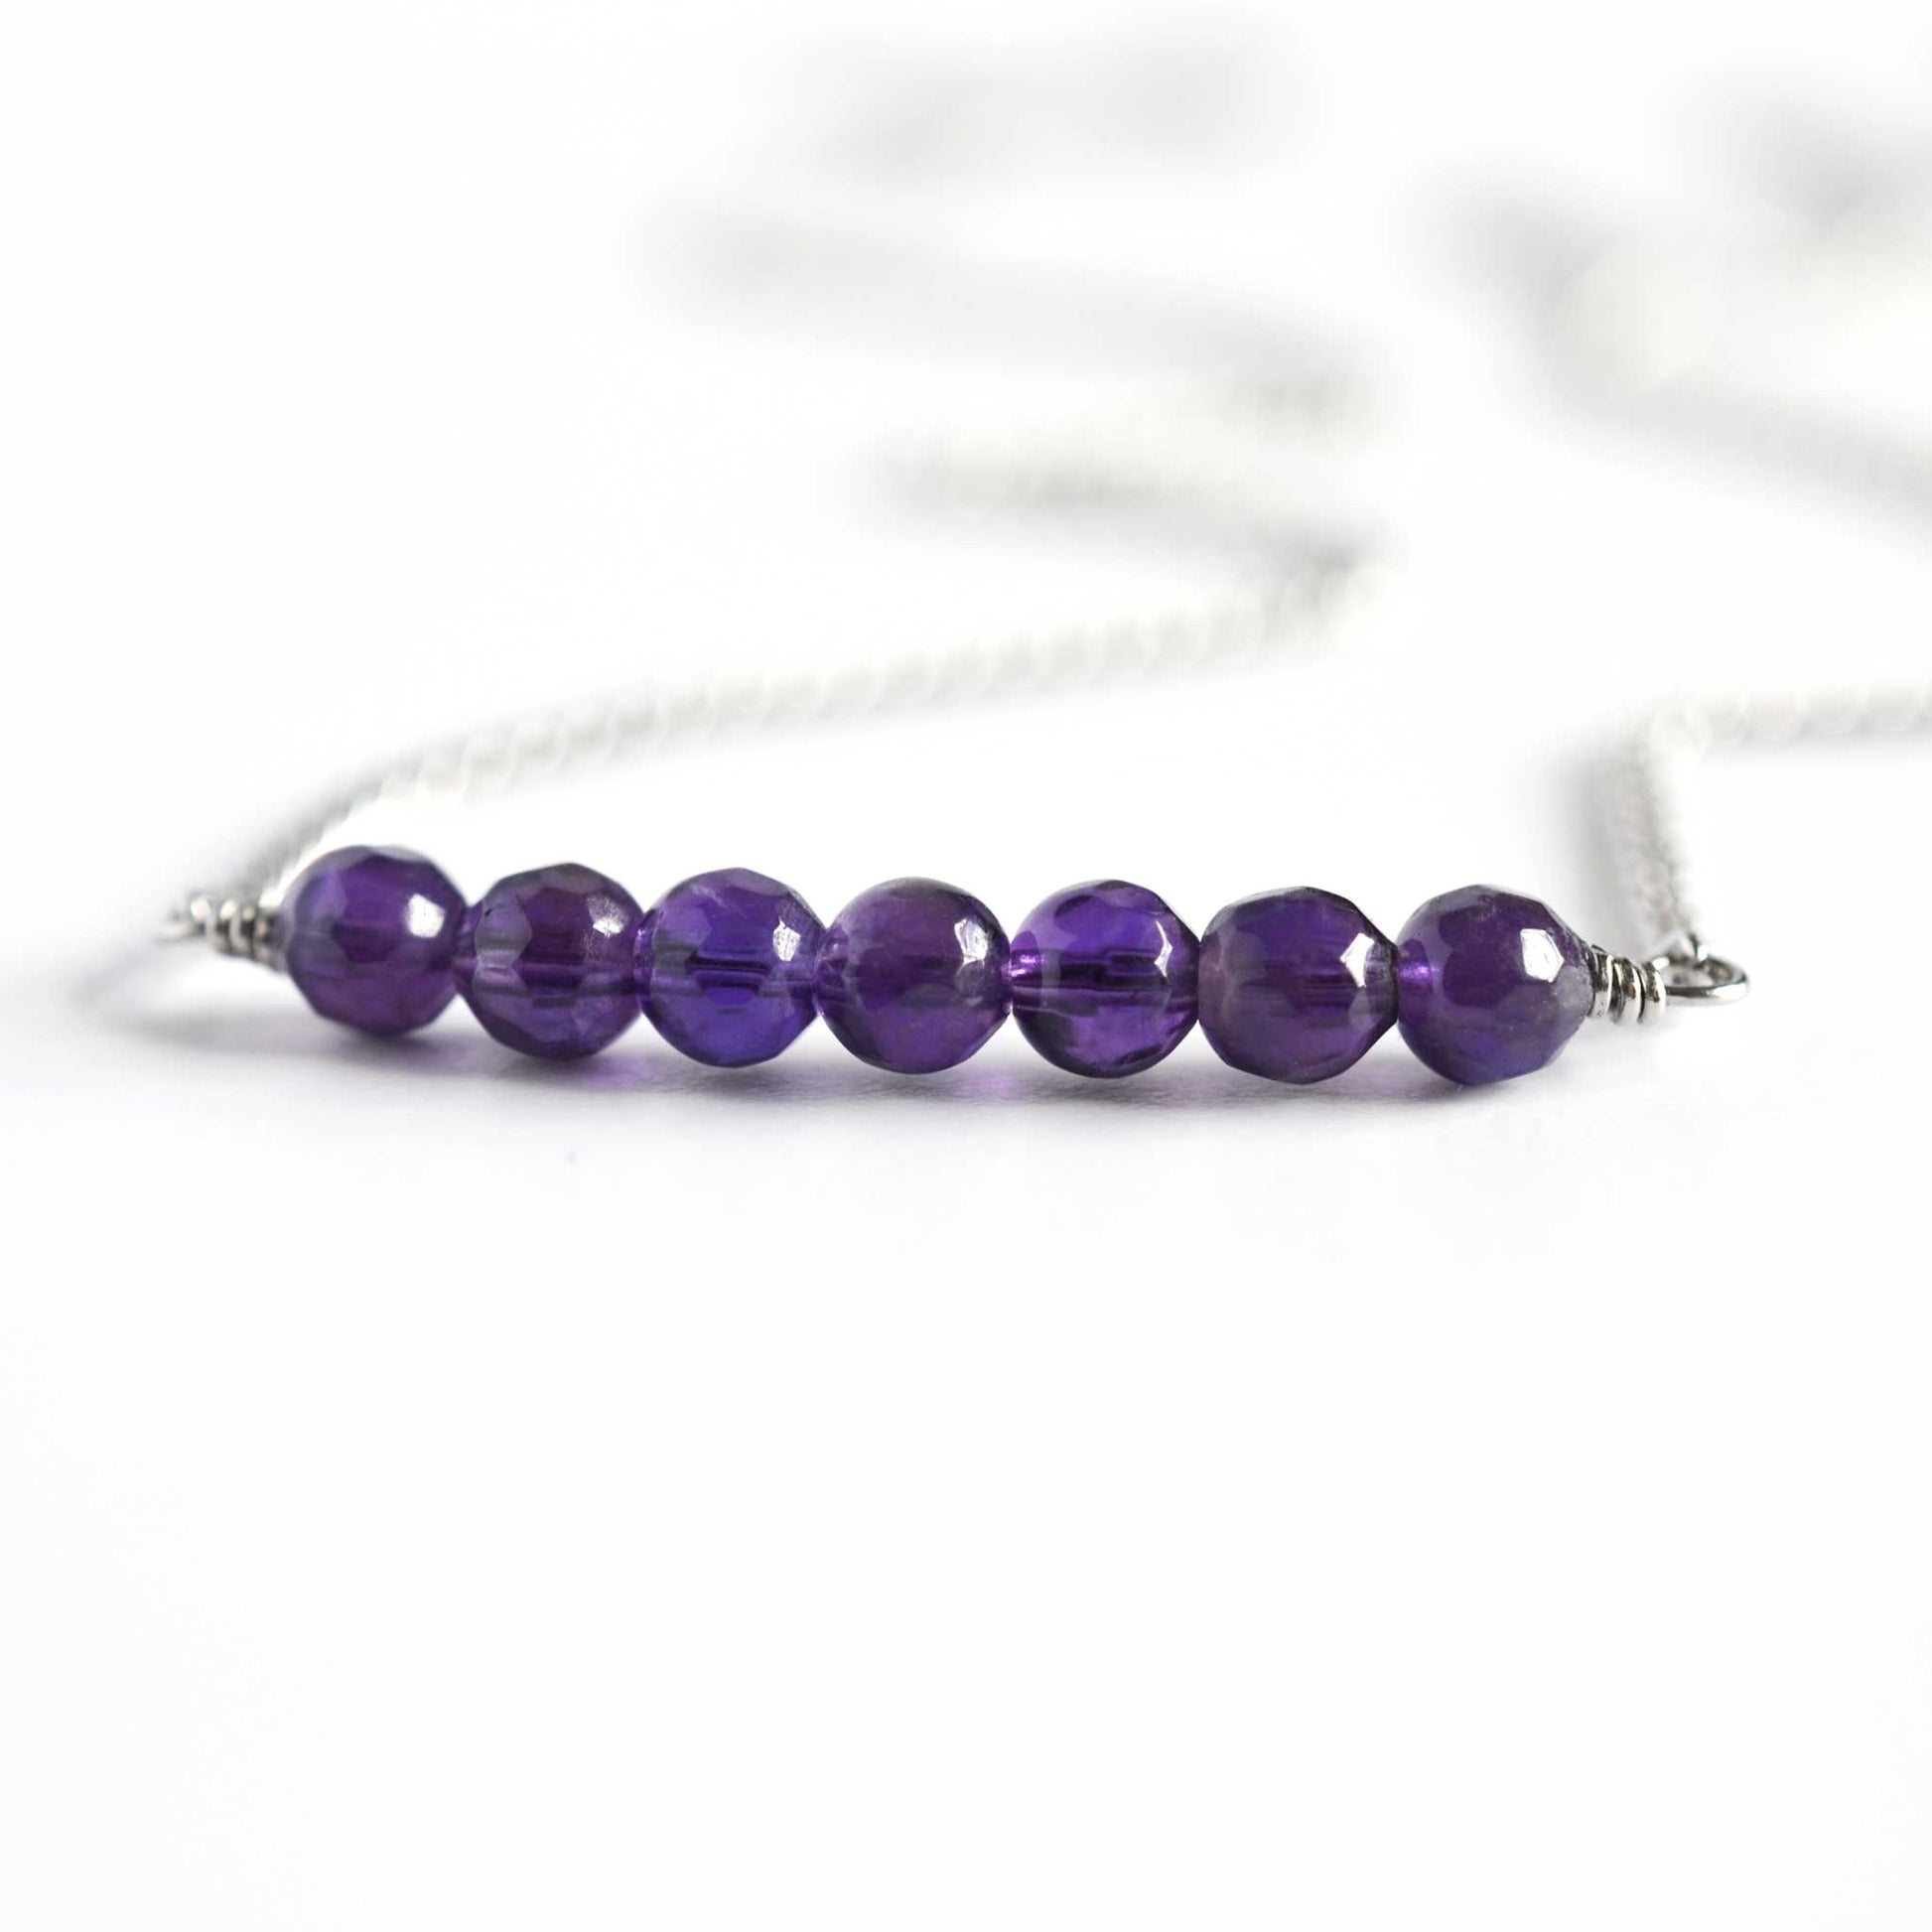 Close up of Amethyst necklace UK made with seven small round faceted purple Amethyst beads